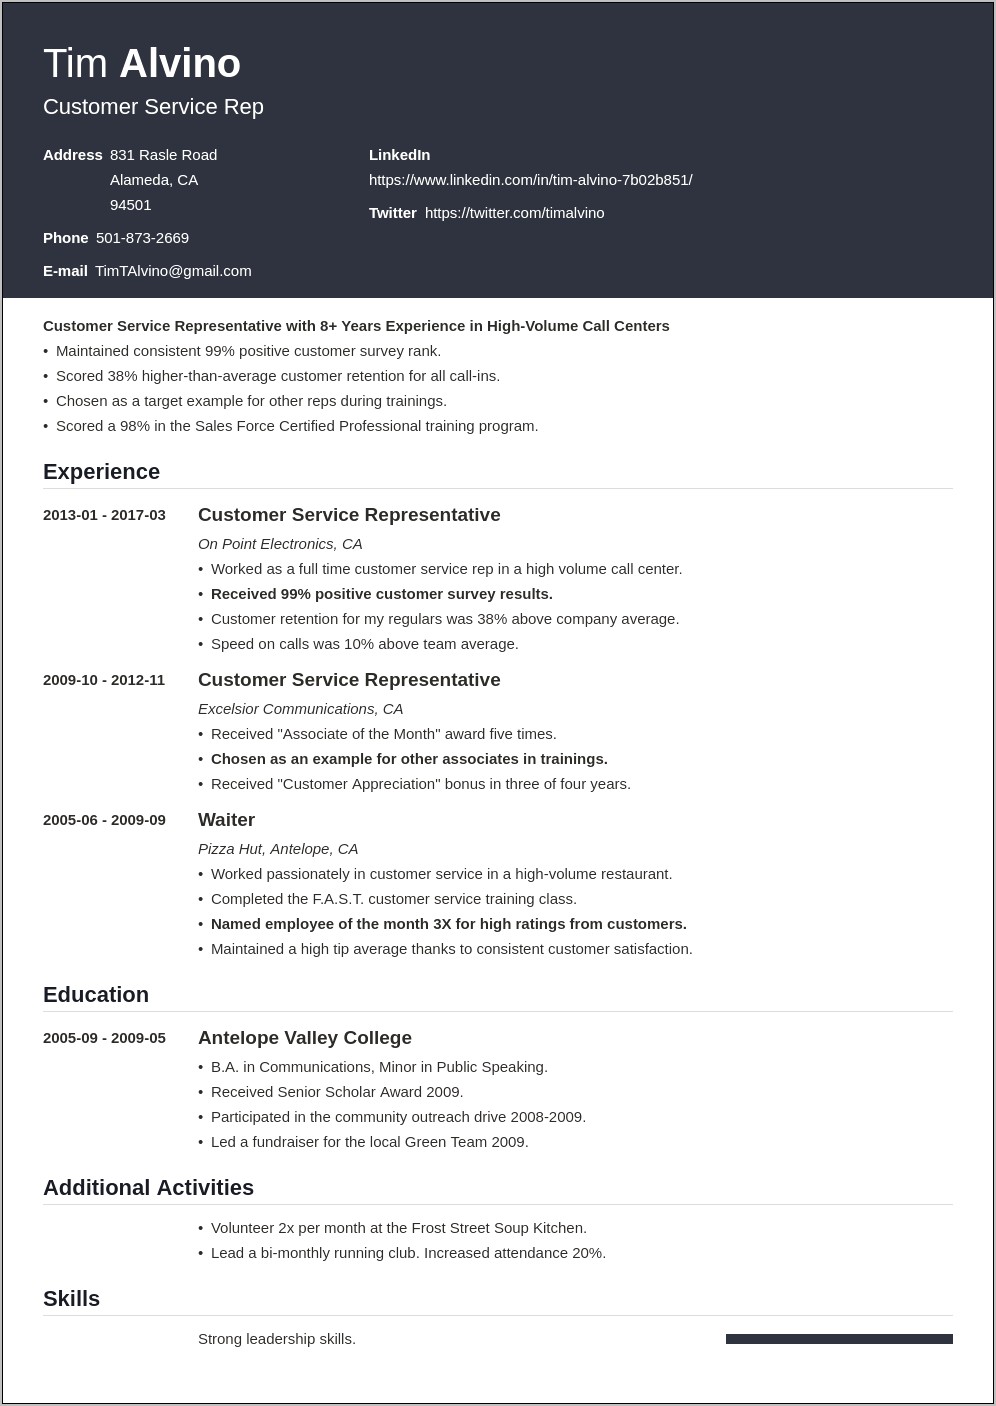 Best Resume Headline For Automation Tester